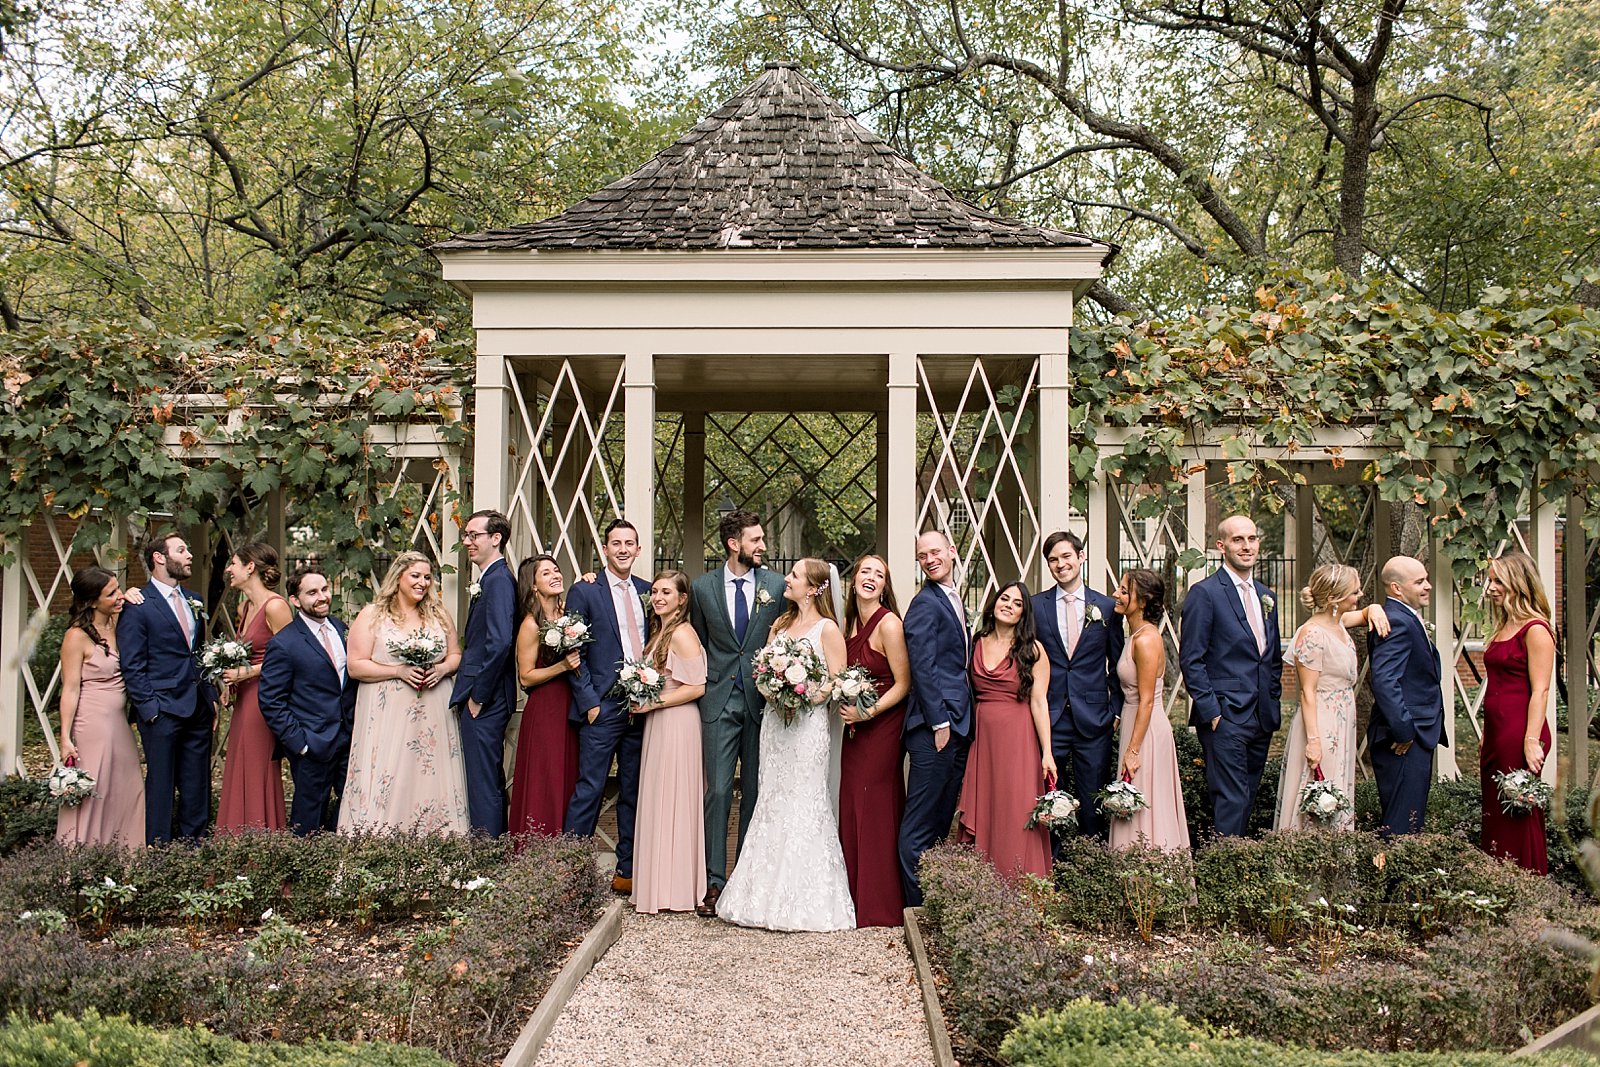 newlyweds pose with wedding party in front of gazebo at the Merchant’s Exchange Building